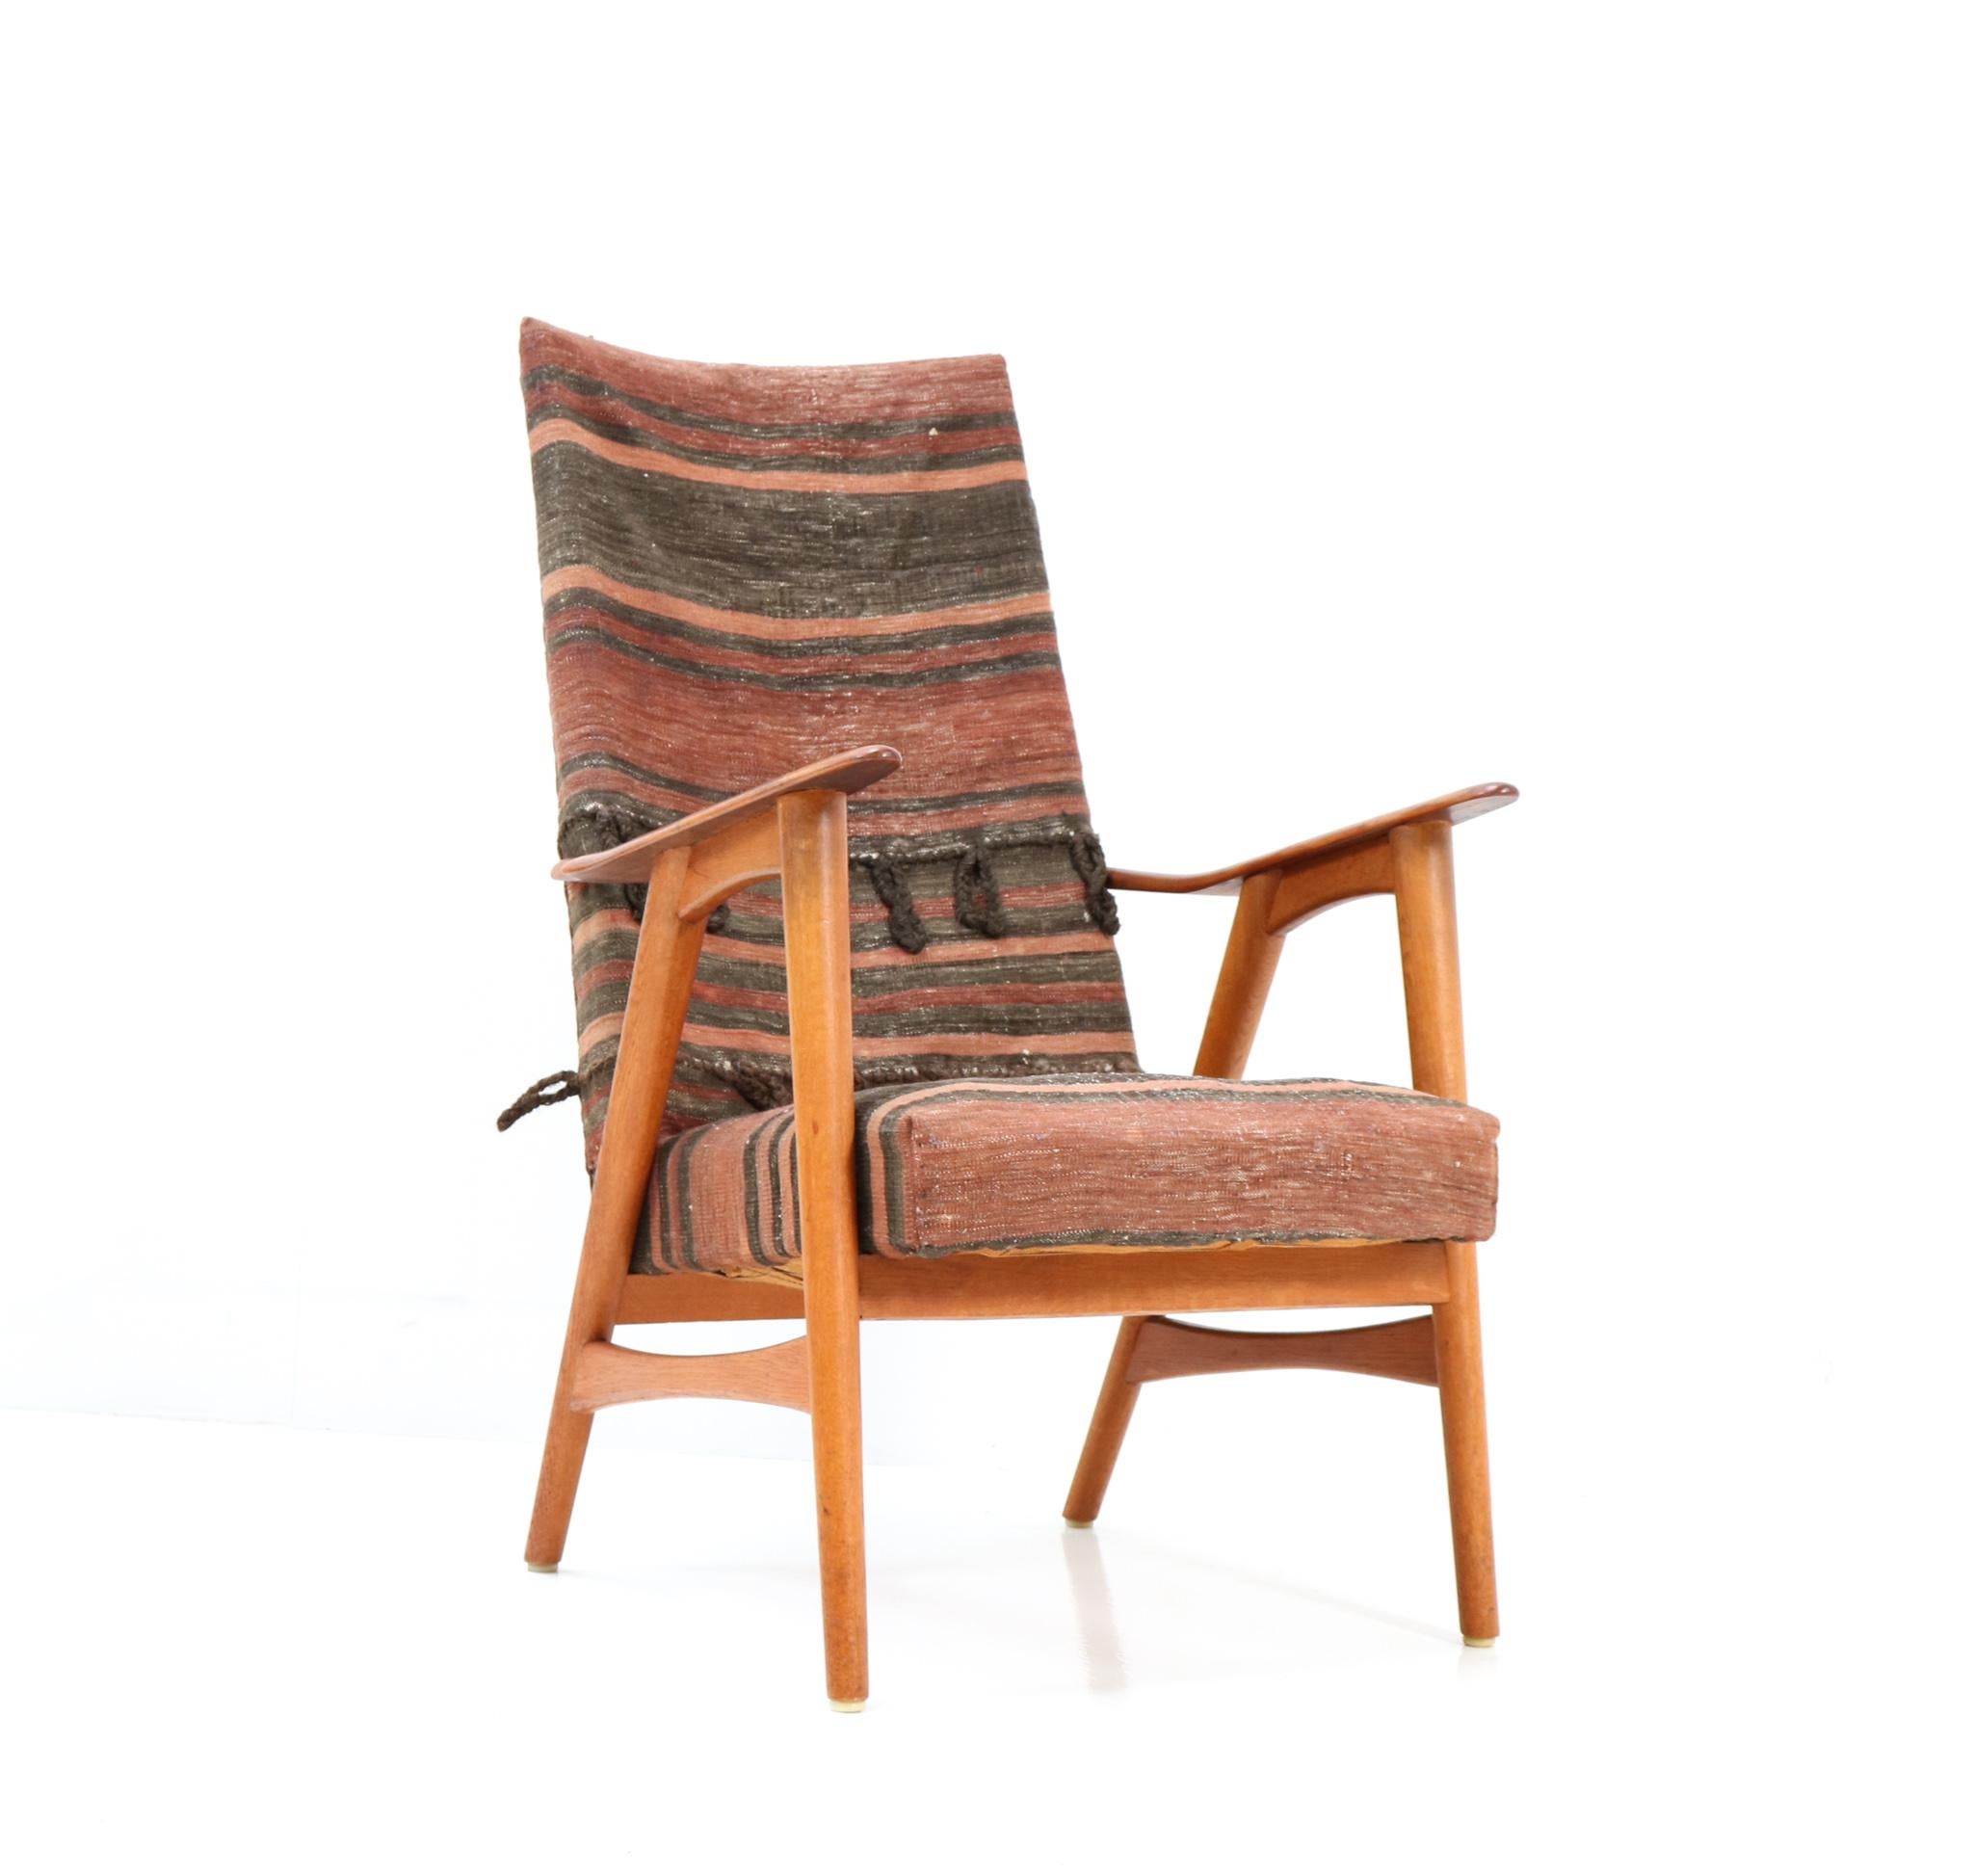 Dutch Teak Mid-Century Modern Lounge Chair with Kilim Upholstery, 1960s For Sale